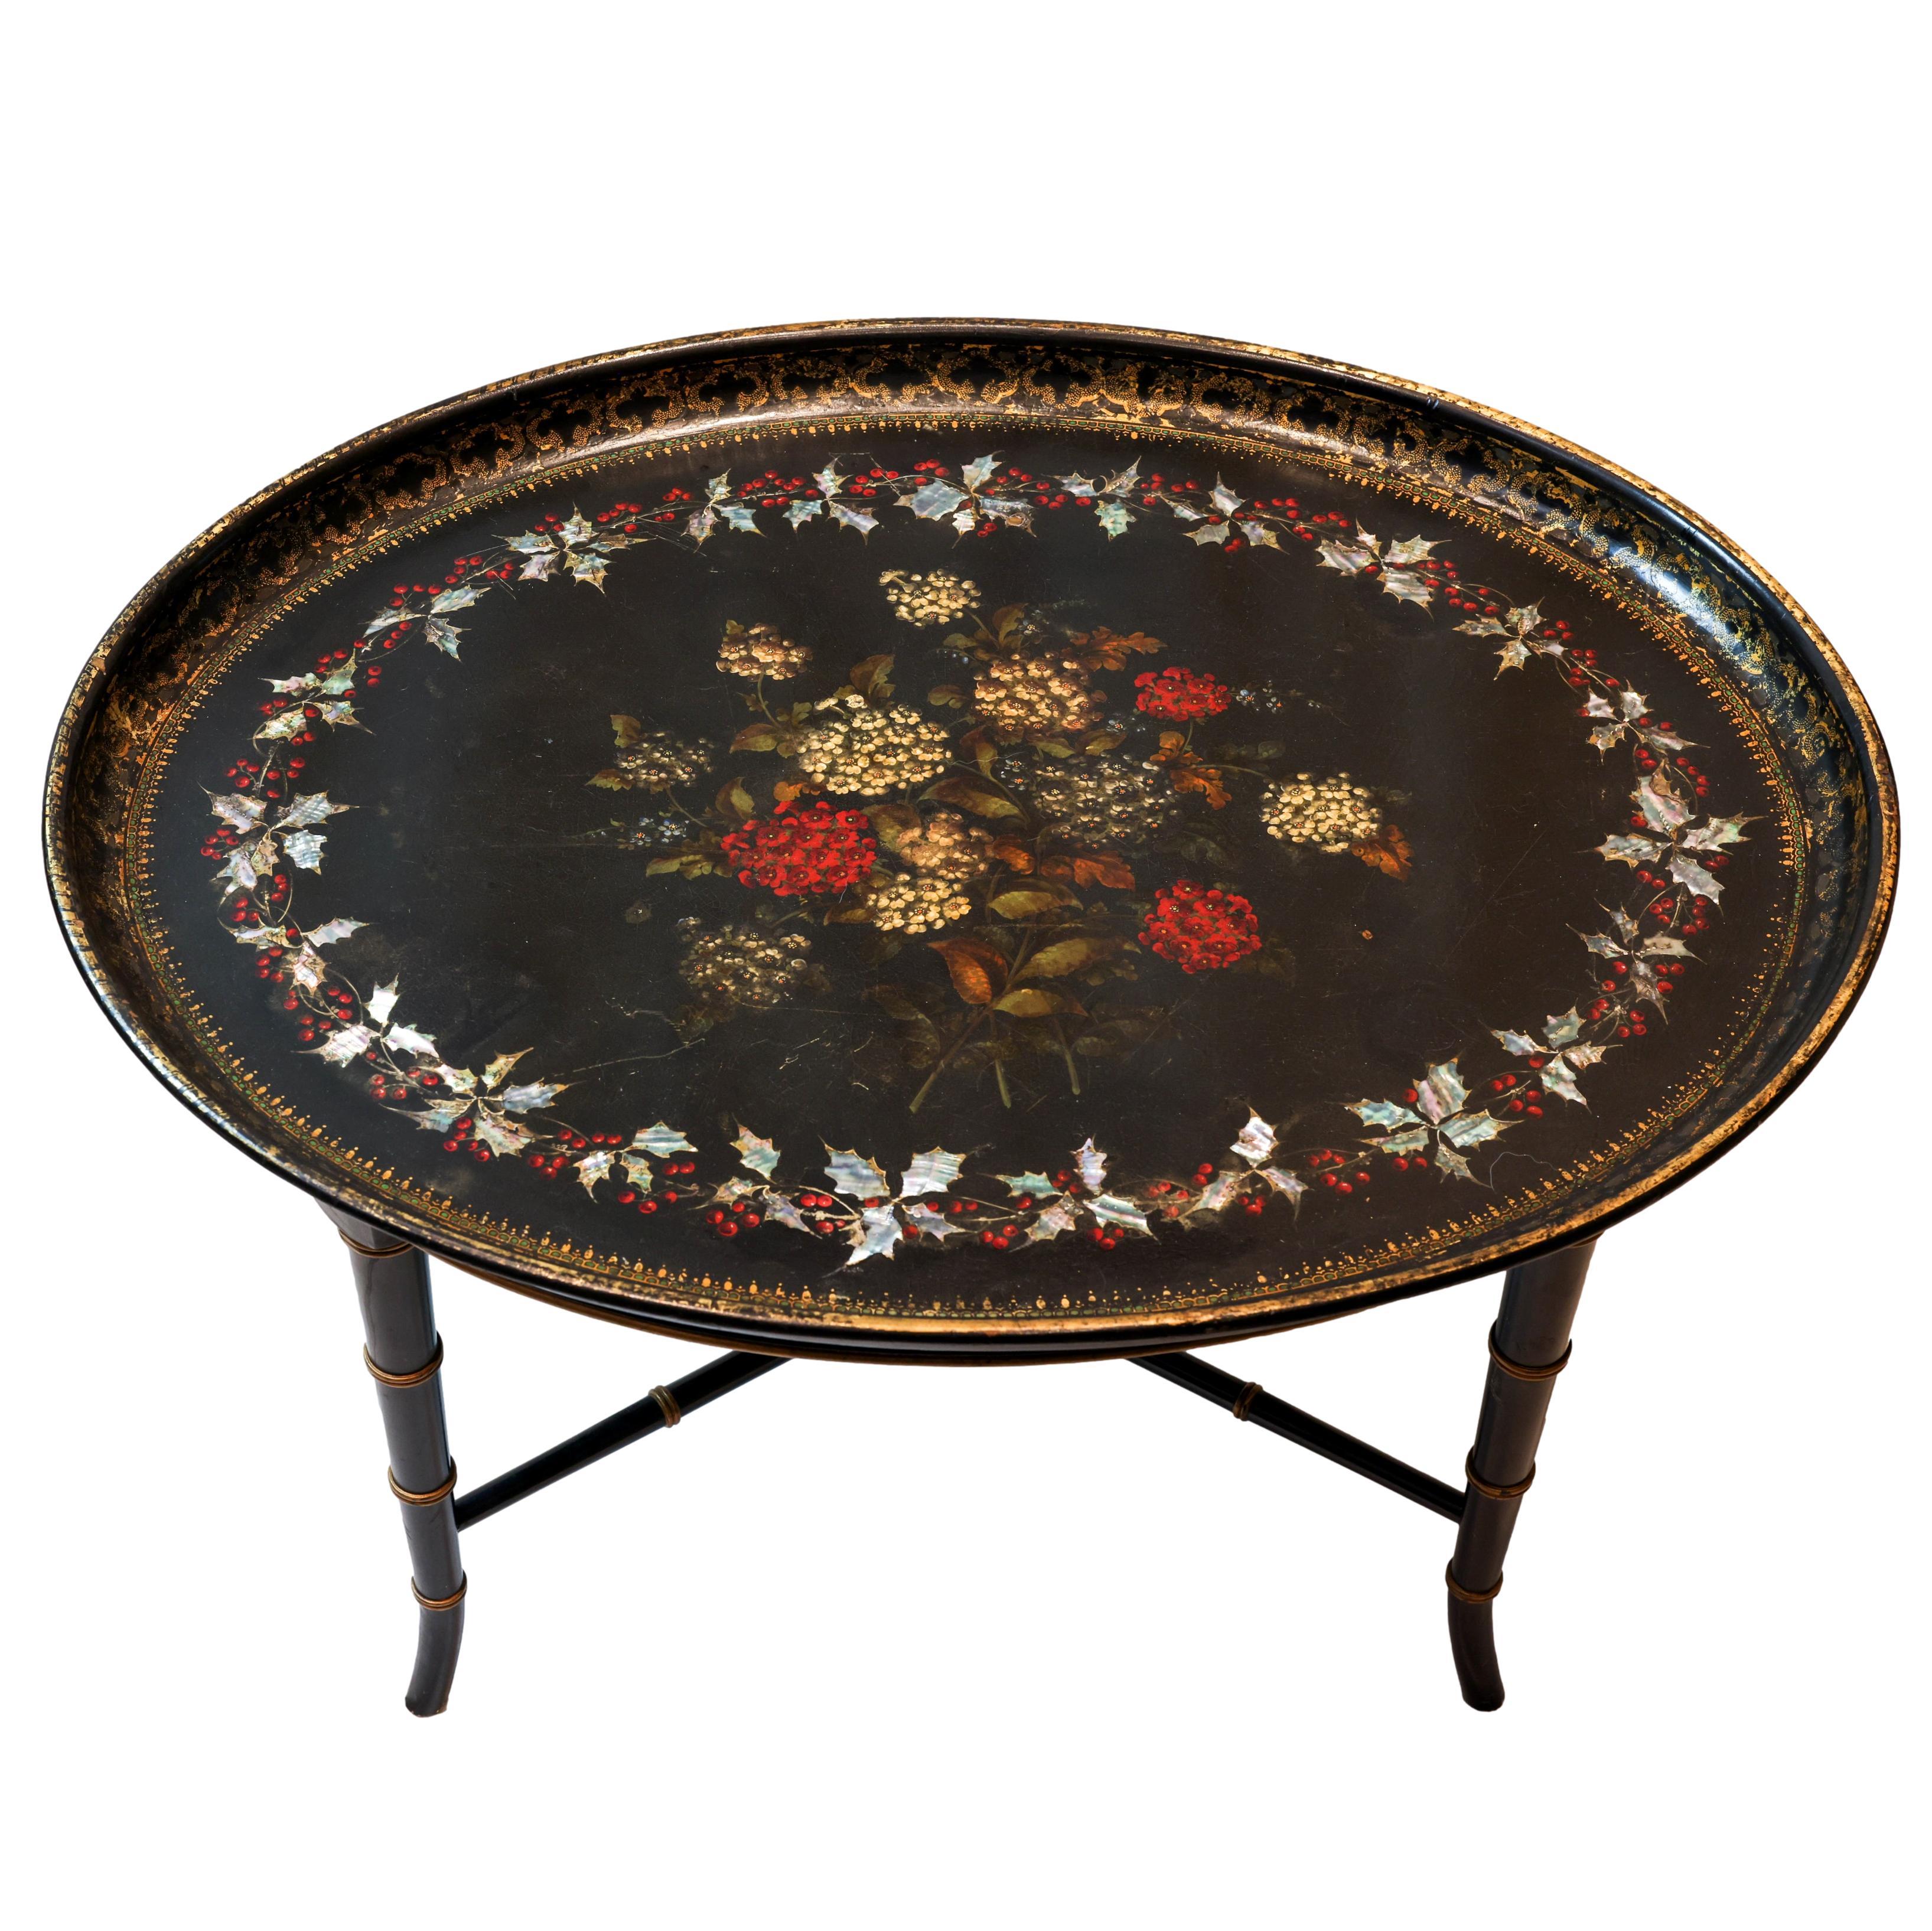 Ebonized paper mache tray table, the oval tray with a central painted still life of hydrangeas, with encircling band of inlaid mother-of-pearl holly leaves and painted red berries, with gilded borders and rim, on a later faux bamboo conforming base.